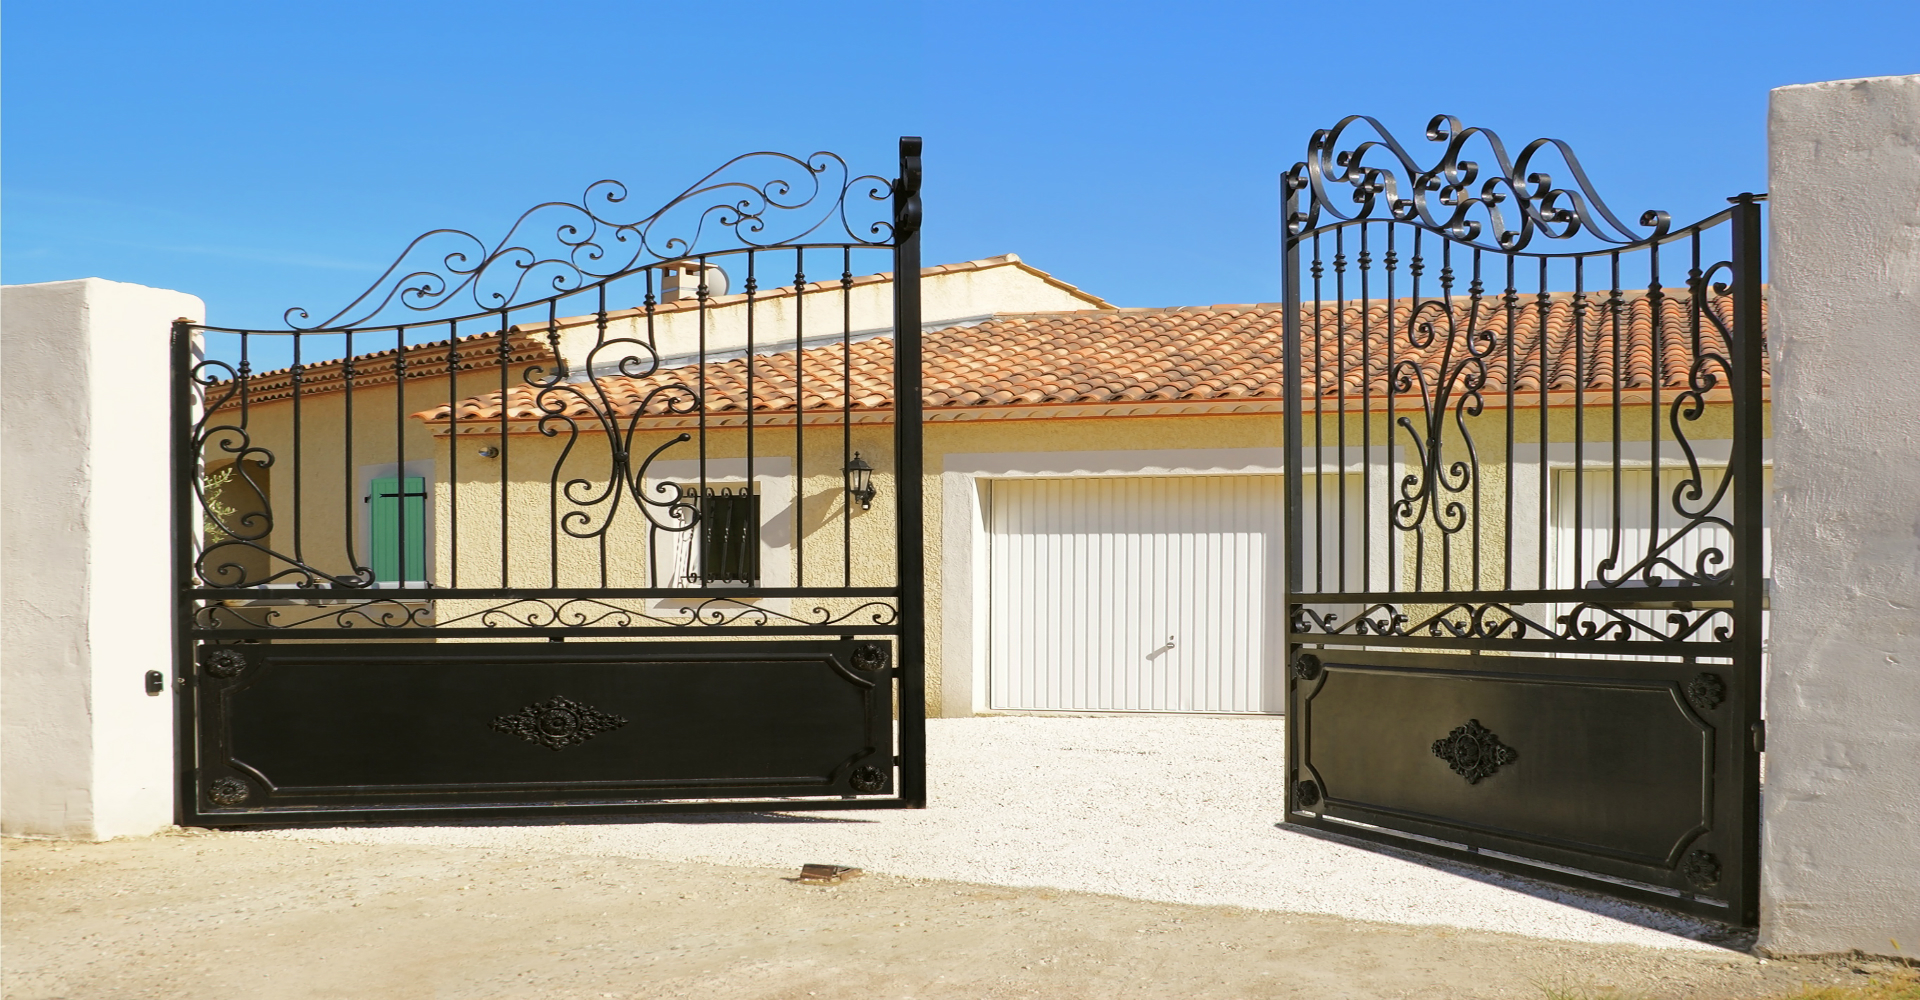 The Pros and Cons of Metal Gates vs Wood Gates